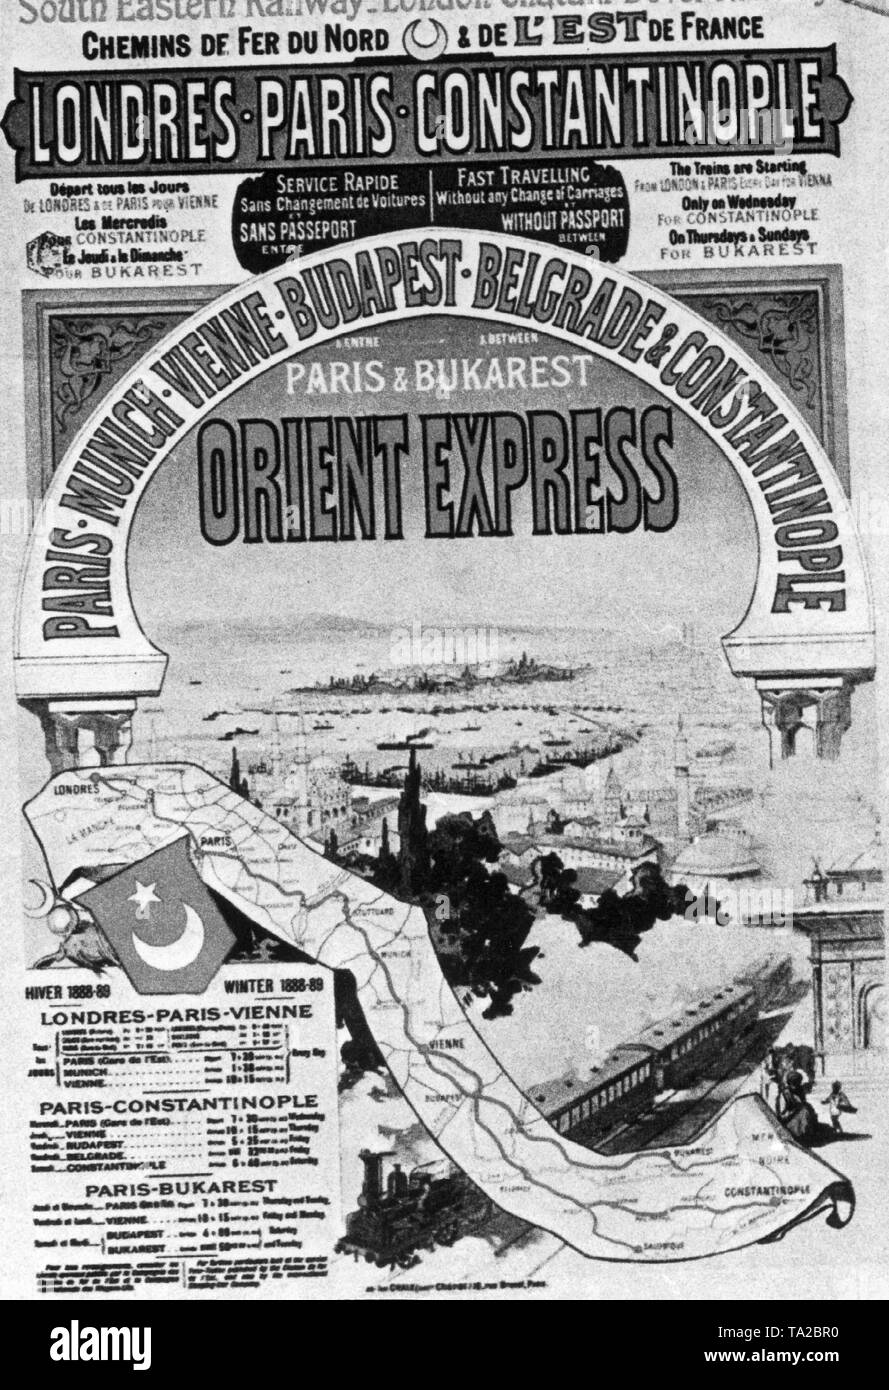 A French advertising poster for the legendary Orient Express, which ran between Paris and Constantinople from 1888 onwards. Stock Photo